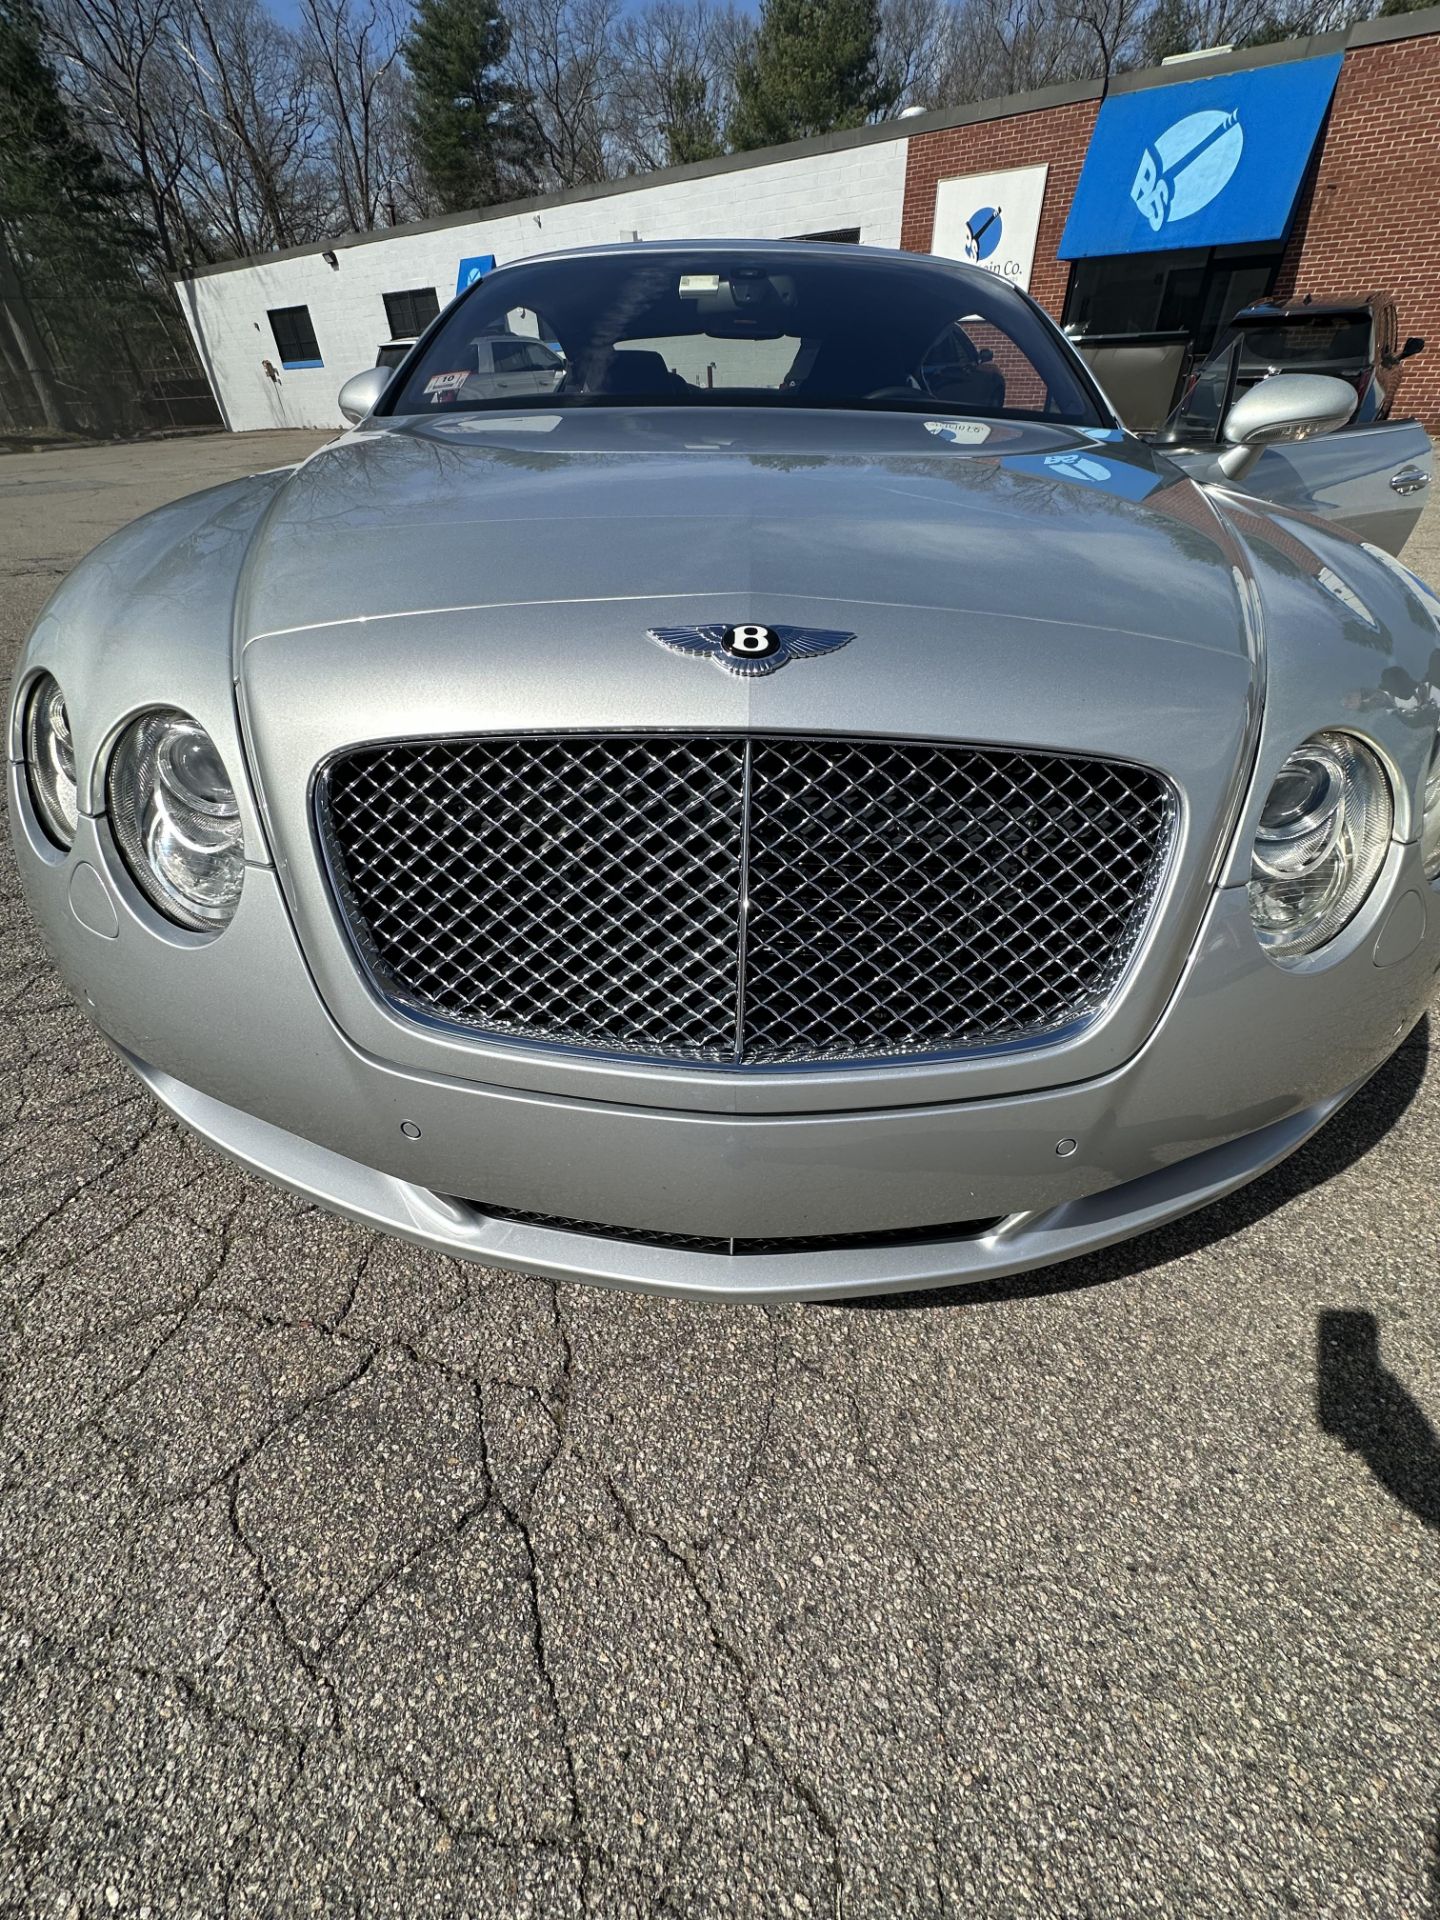 2005 Bentley Continental GT Coupe, Odom: 14,600, VIN#: SCBCR63W35C029782 - Image 21 of 24